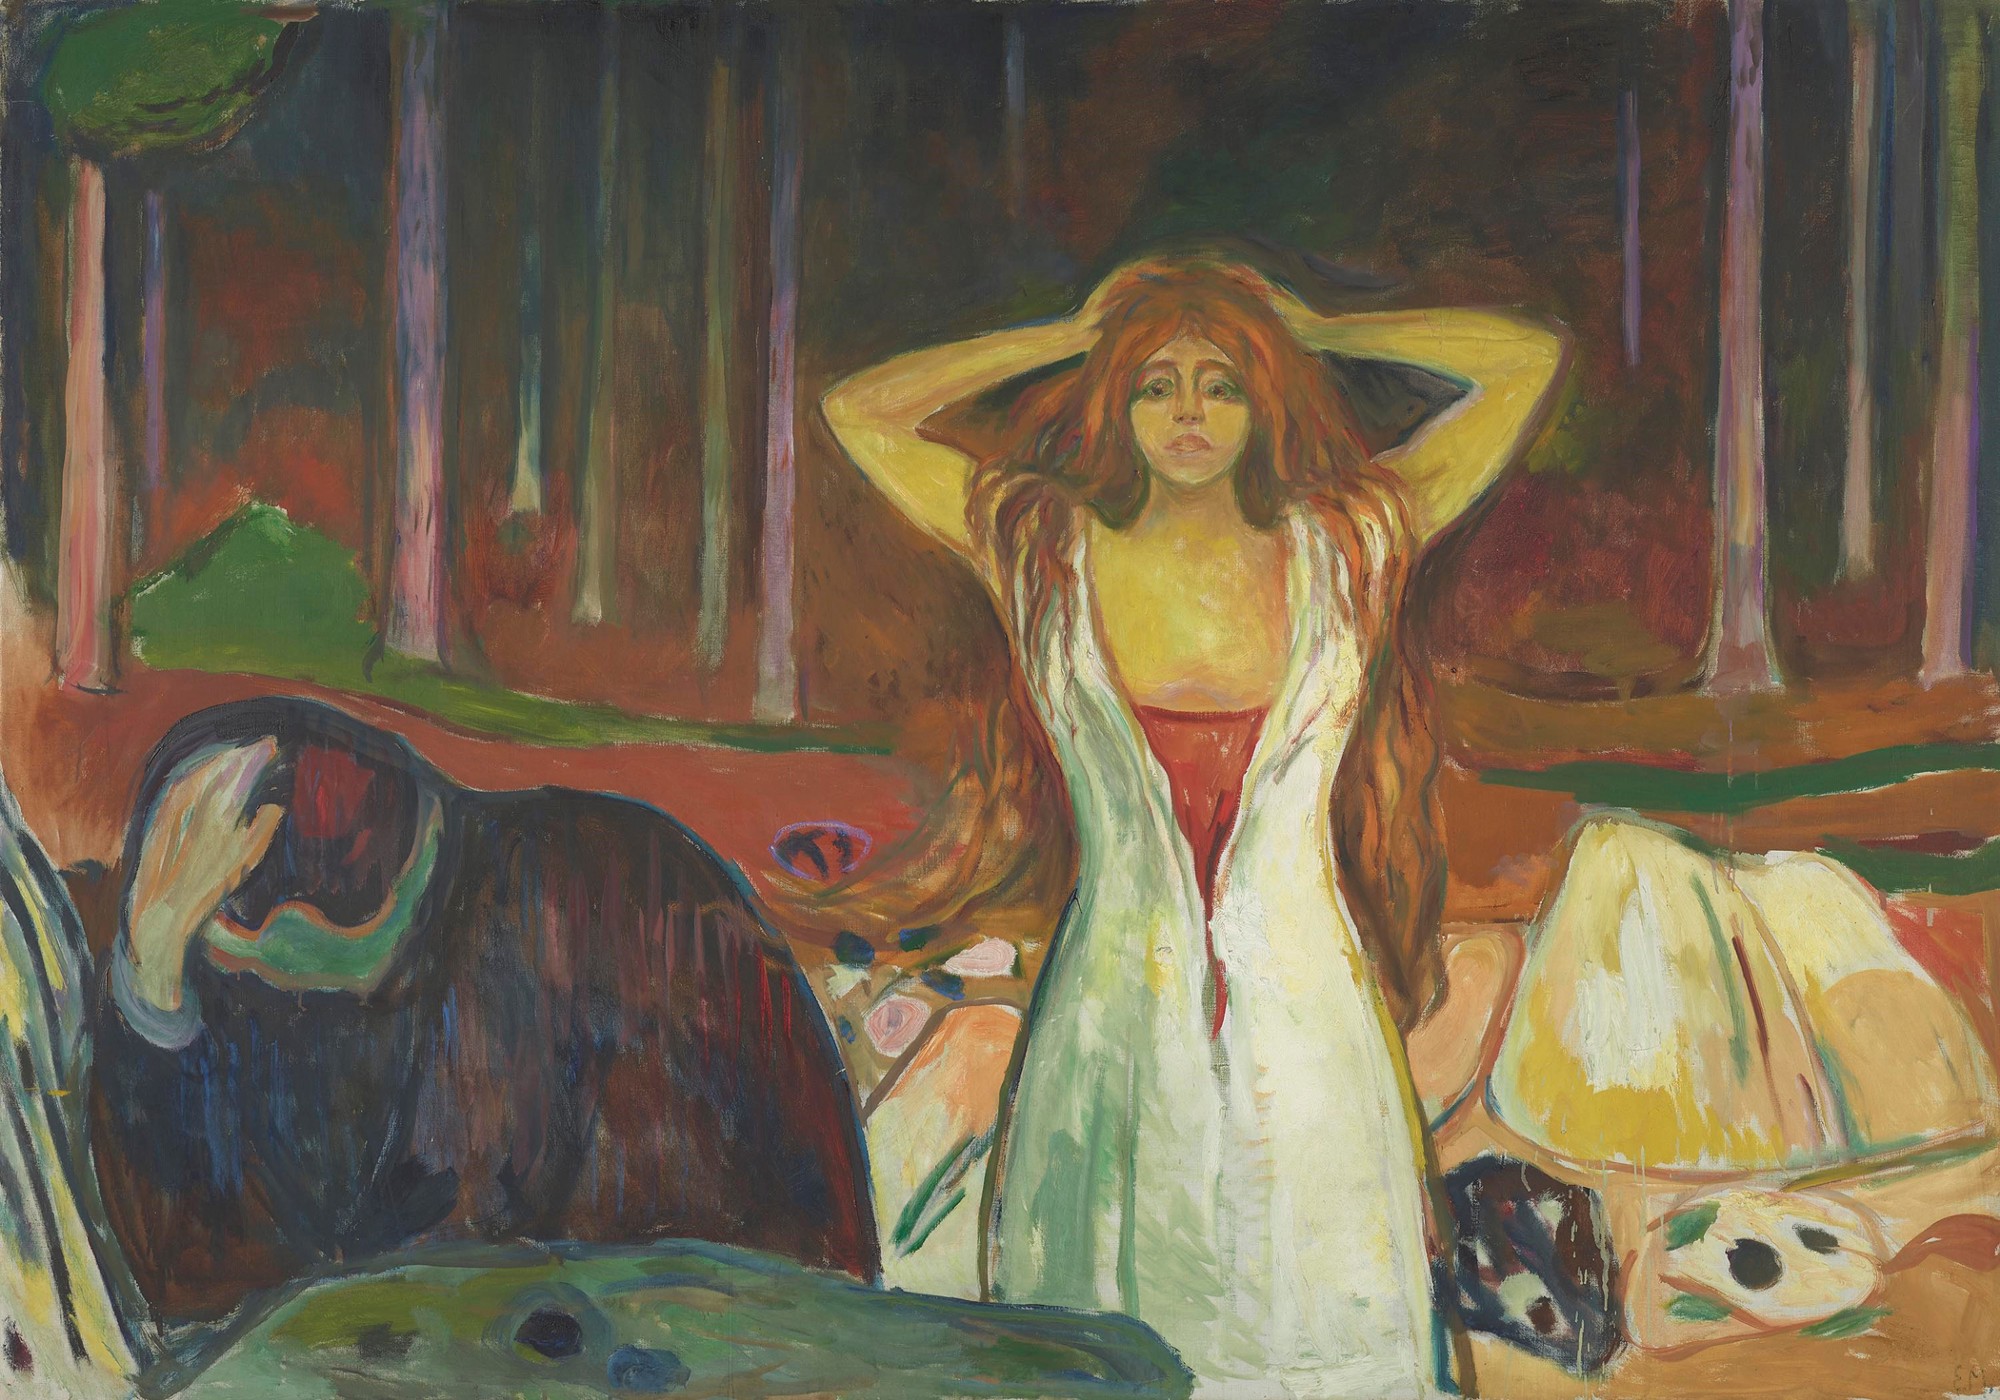 Cendres by Edvard Munch - 1894 Le Musée Munch